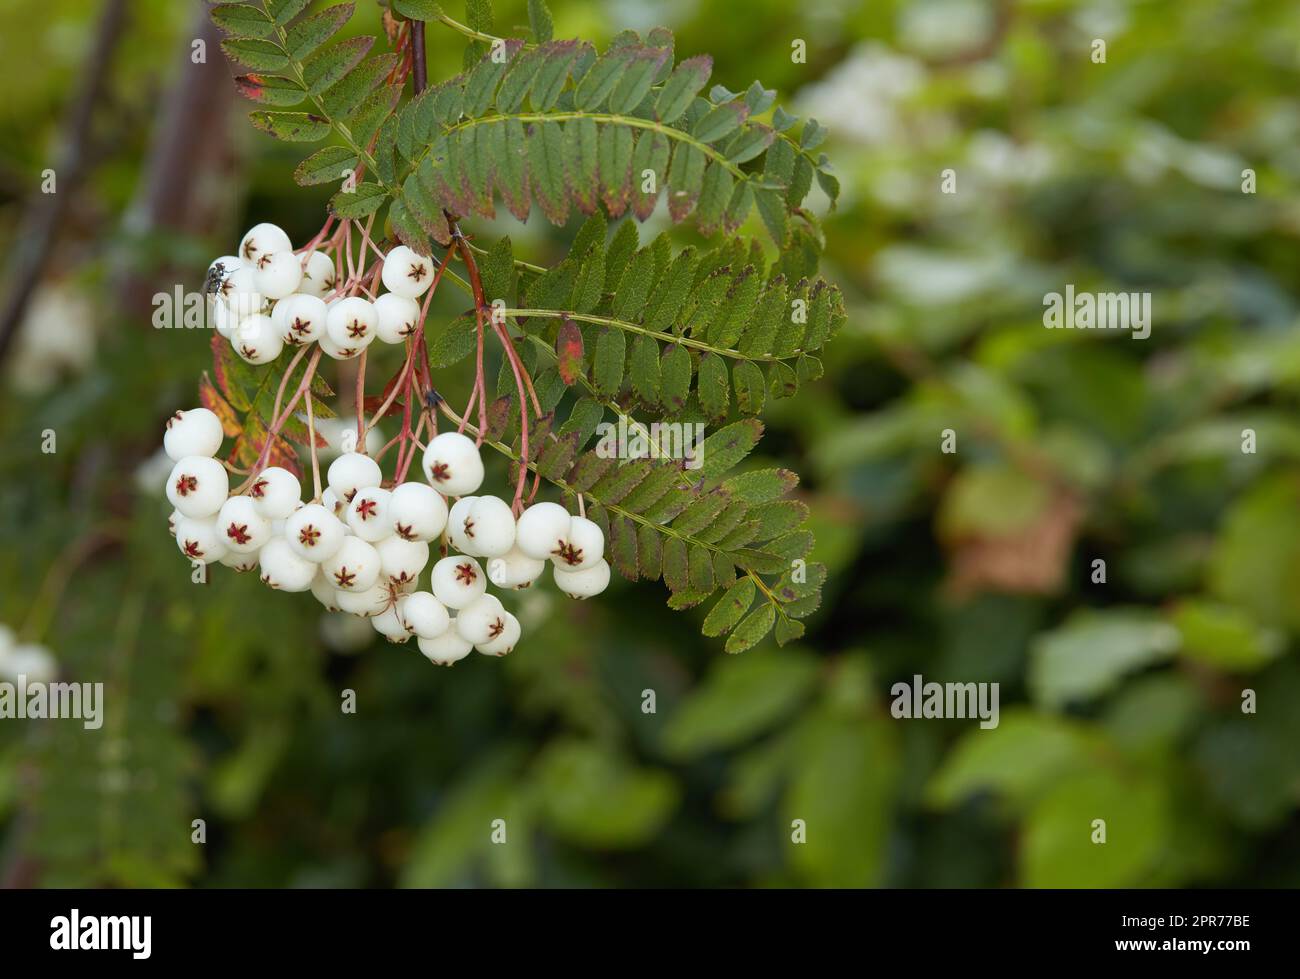 A beautiful Sorbus Fruticosa growing in a lush green garden outdoors with bush and nature in the background. An ornamental plant grown in summer with white berries. Bright foliage outside in spring Stock Photo